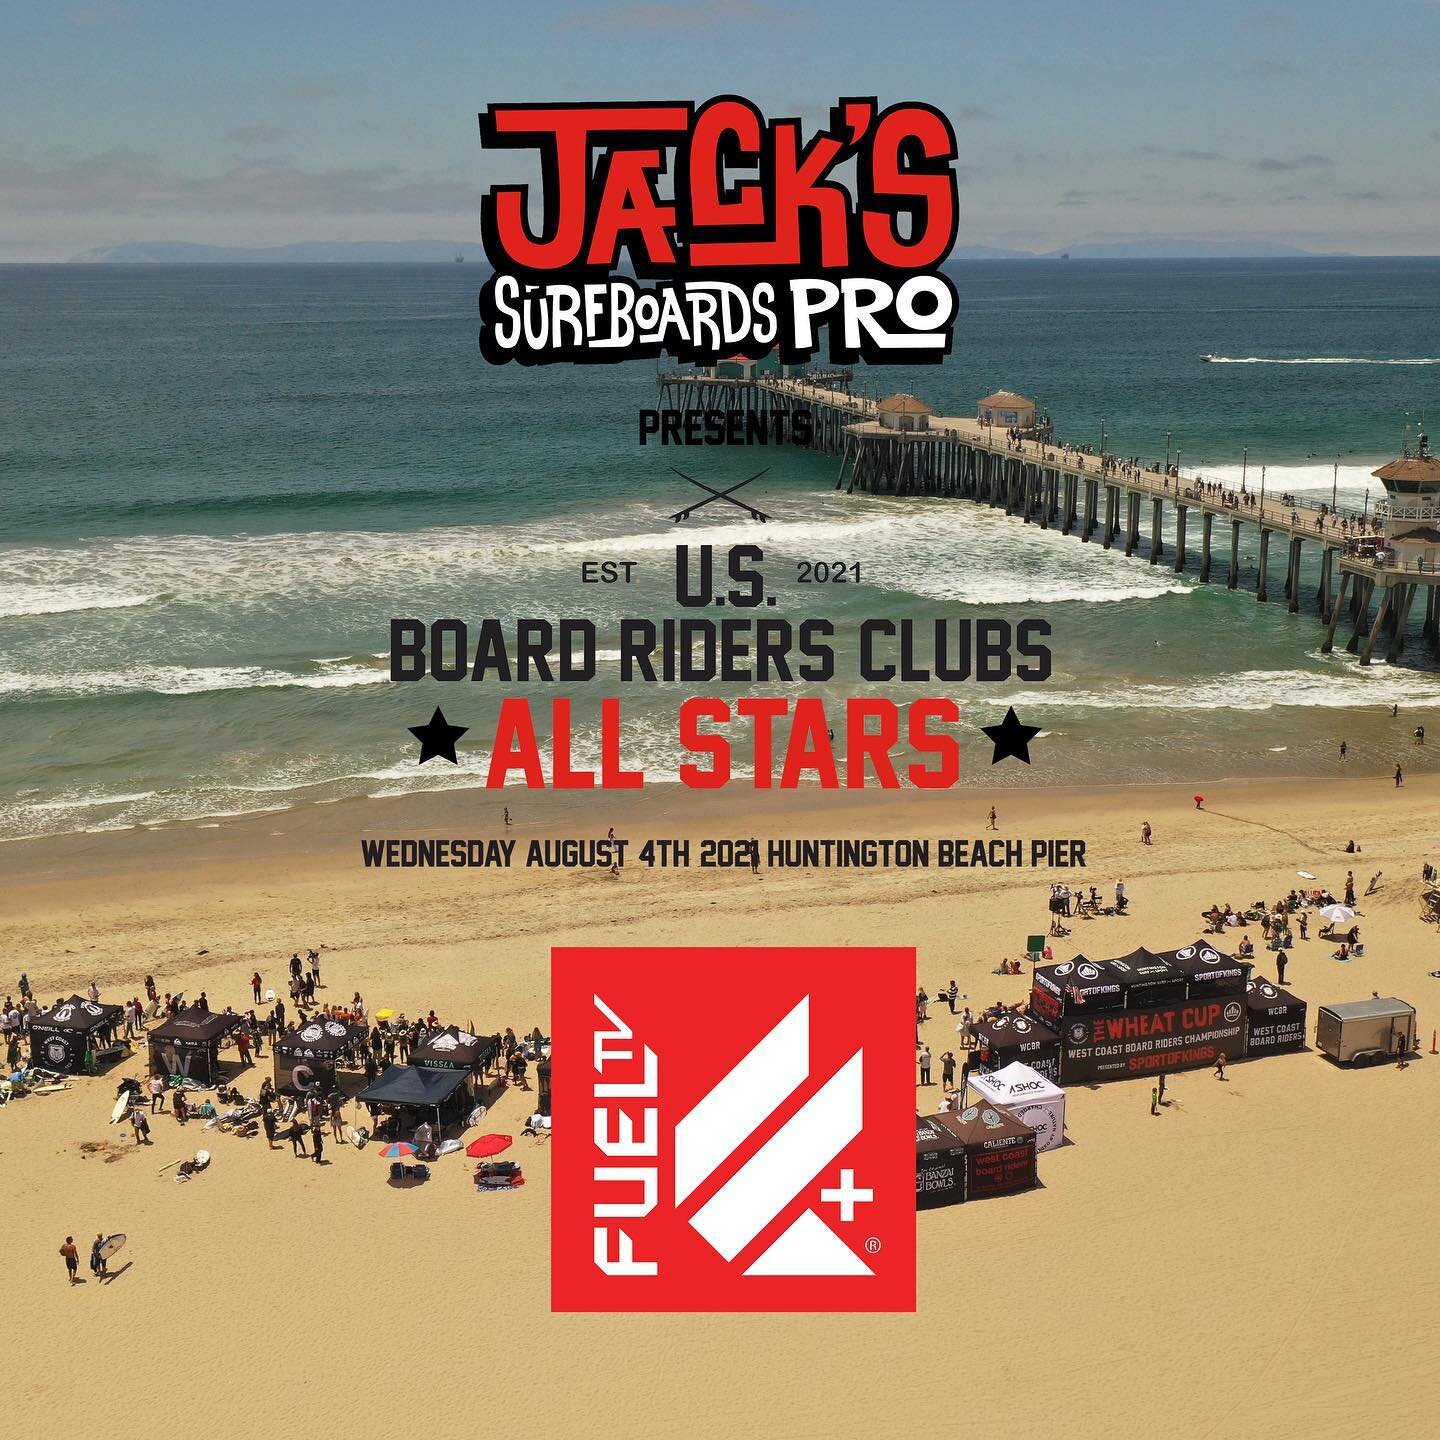 For everyone who can&rsquo;t make it tomorrow to &ldquo;The Jack&rsquo;s Surfboards Pro Presents the 2021 US Board Riders All Stars&rdquo; at the Huntington Beach Pier we have a way for you to catch every minute. We&rsquo;re stoked to offer a 50% d